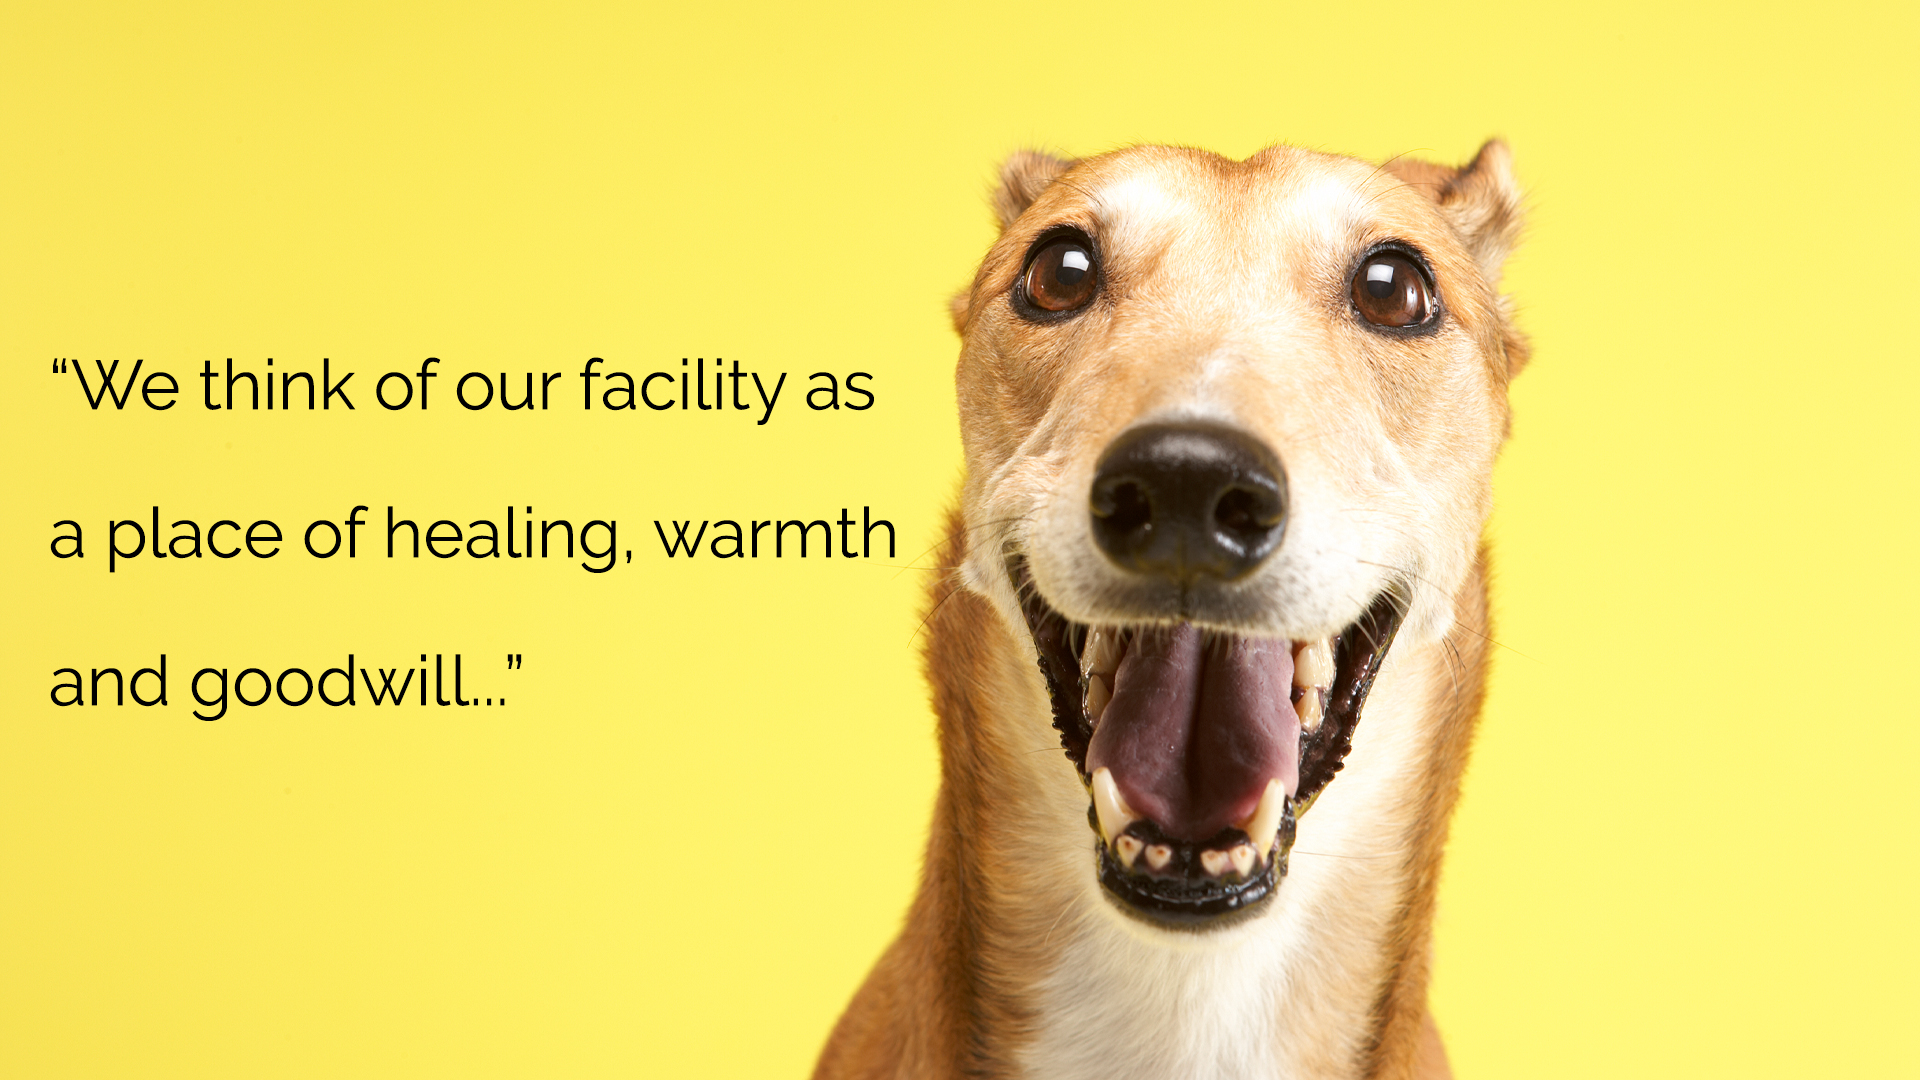 We think of our facility as a place of healing, warmth and goodwill